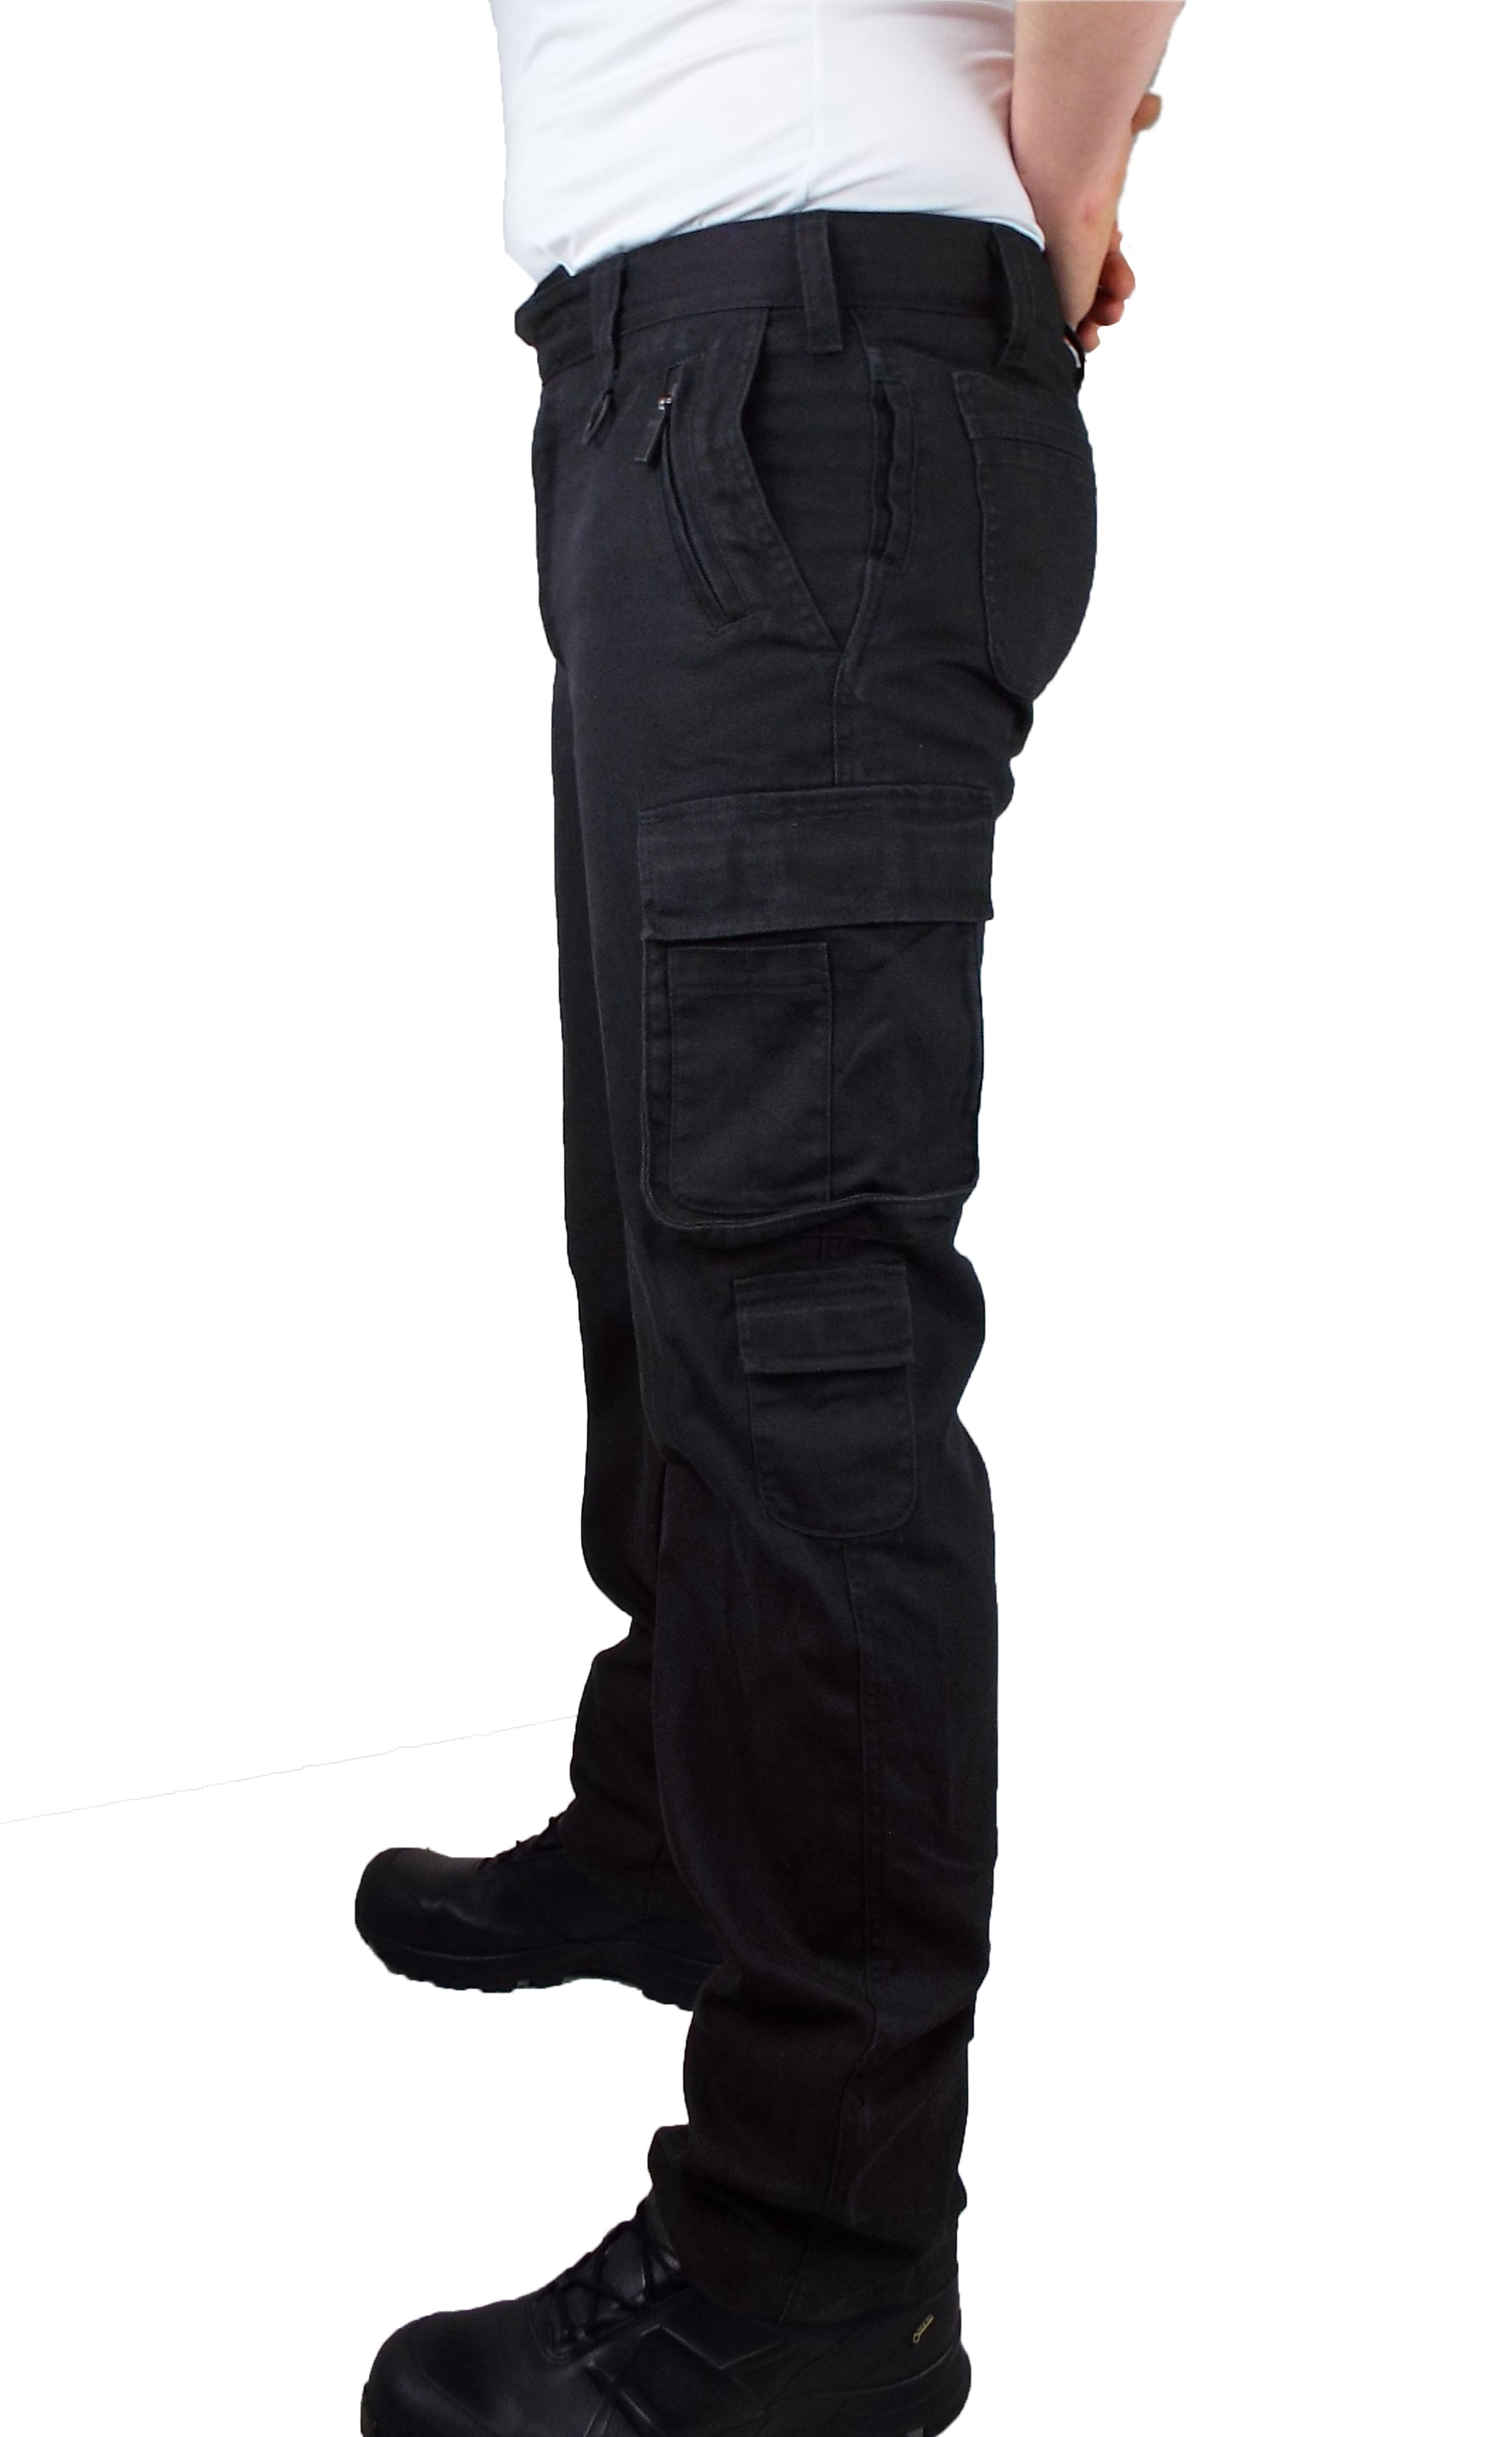 BLAKLÄDER Service Work trousers Denim Stretch navy blue  working trousers   Trousers  Clothing  Bader Outdoor  Shop